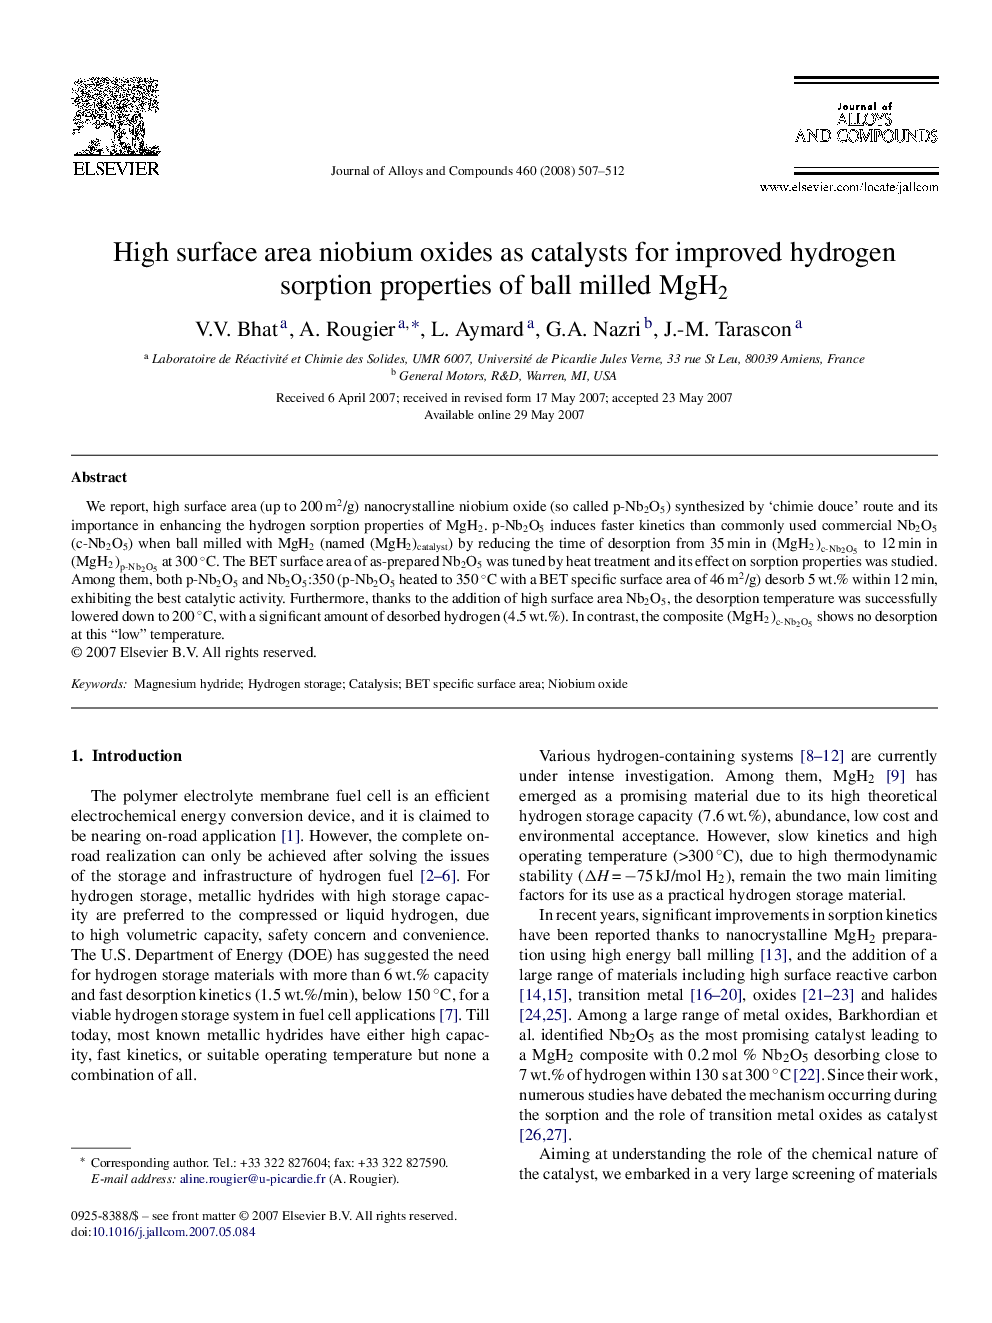 High surface area niobium oxides as catalysts for improved hydrogen sorption properties of ball milled MgH2